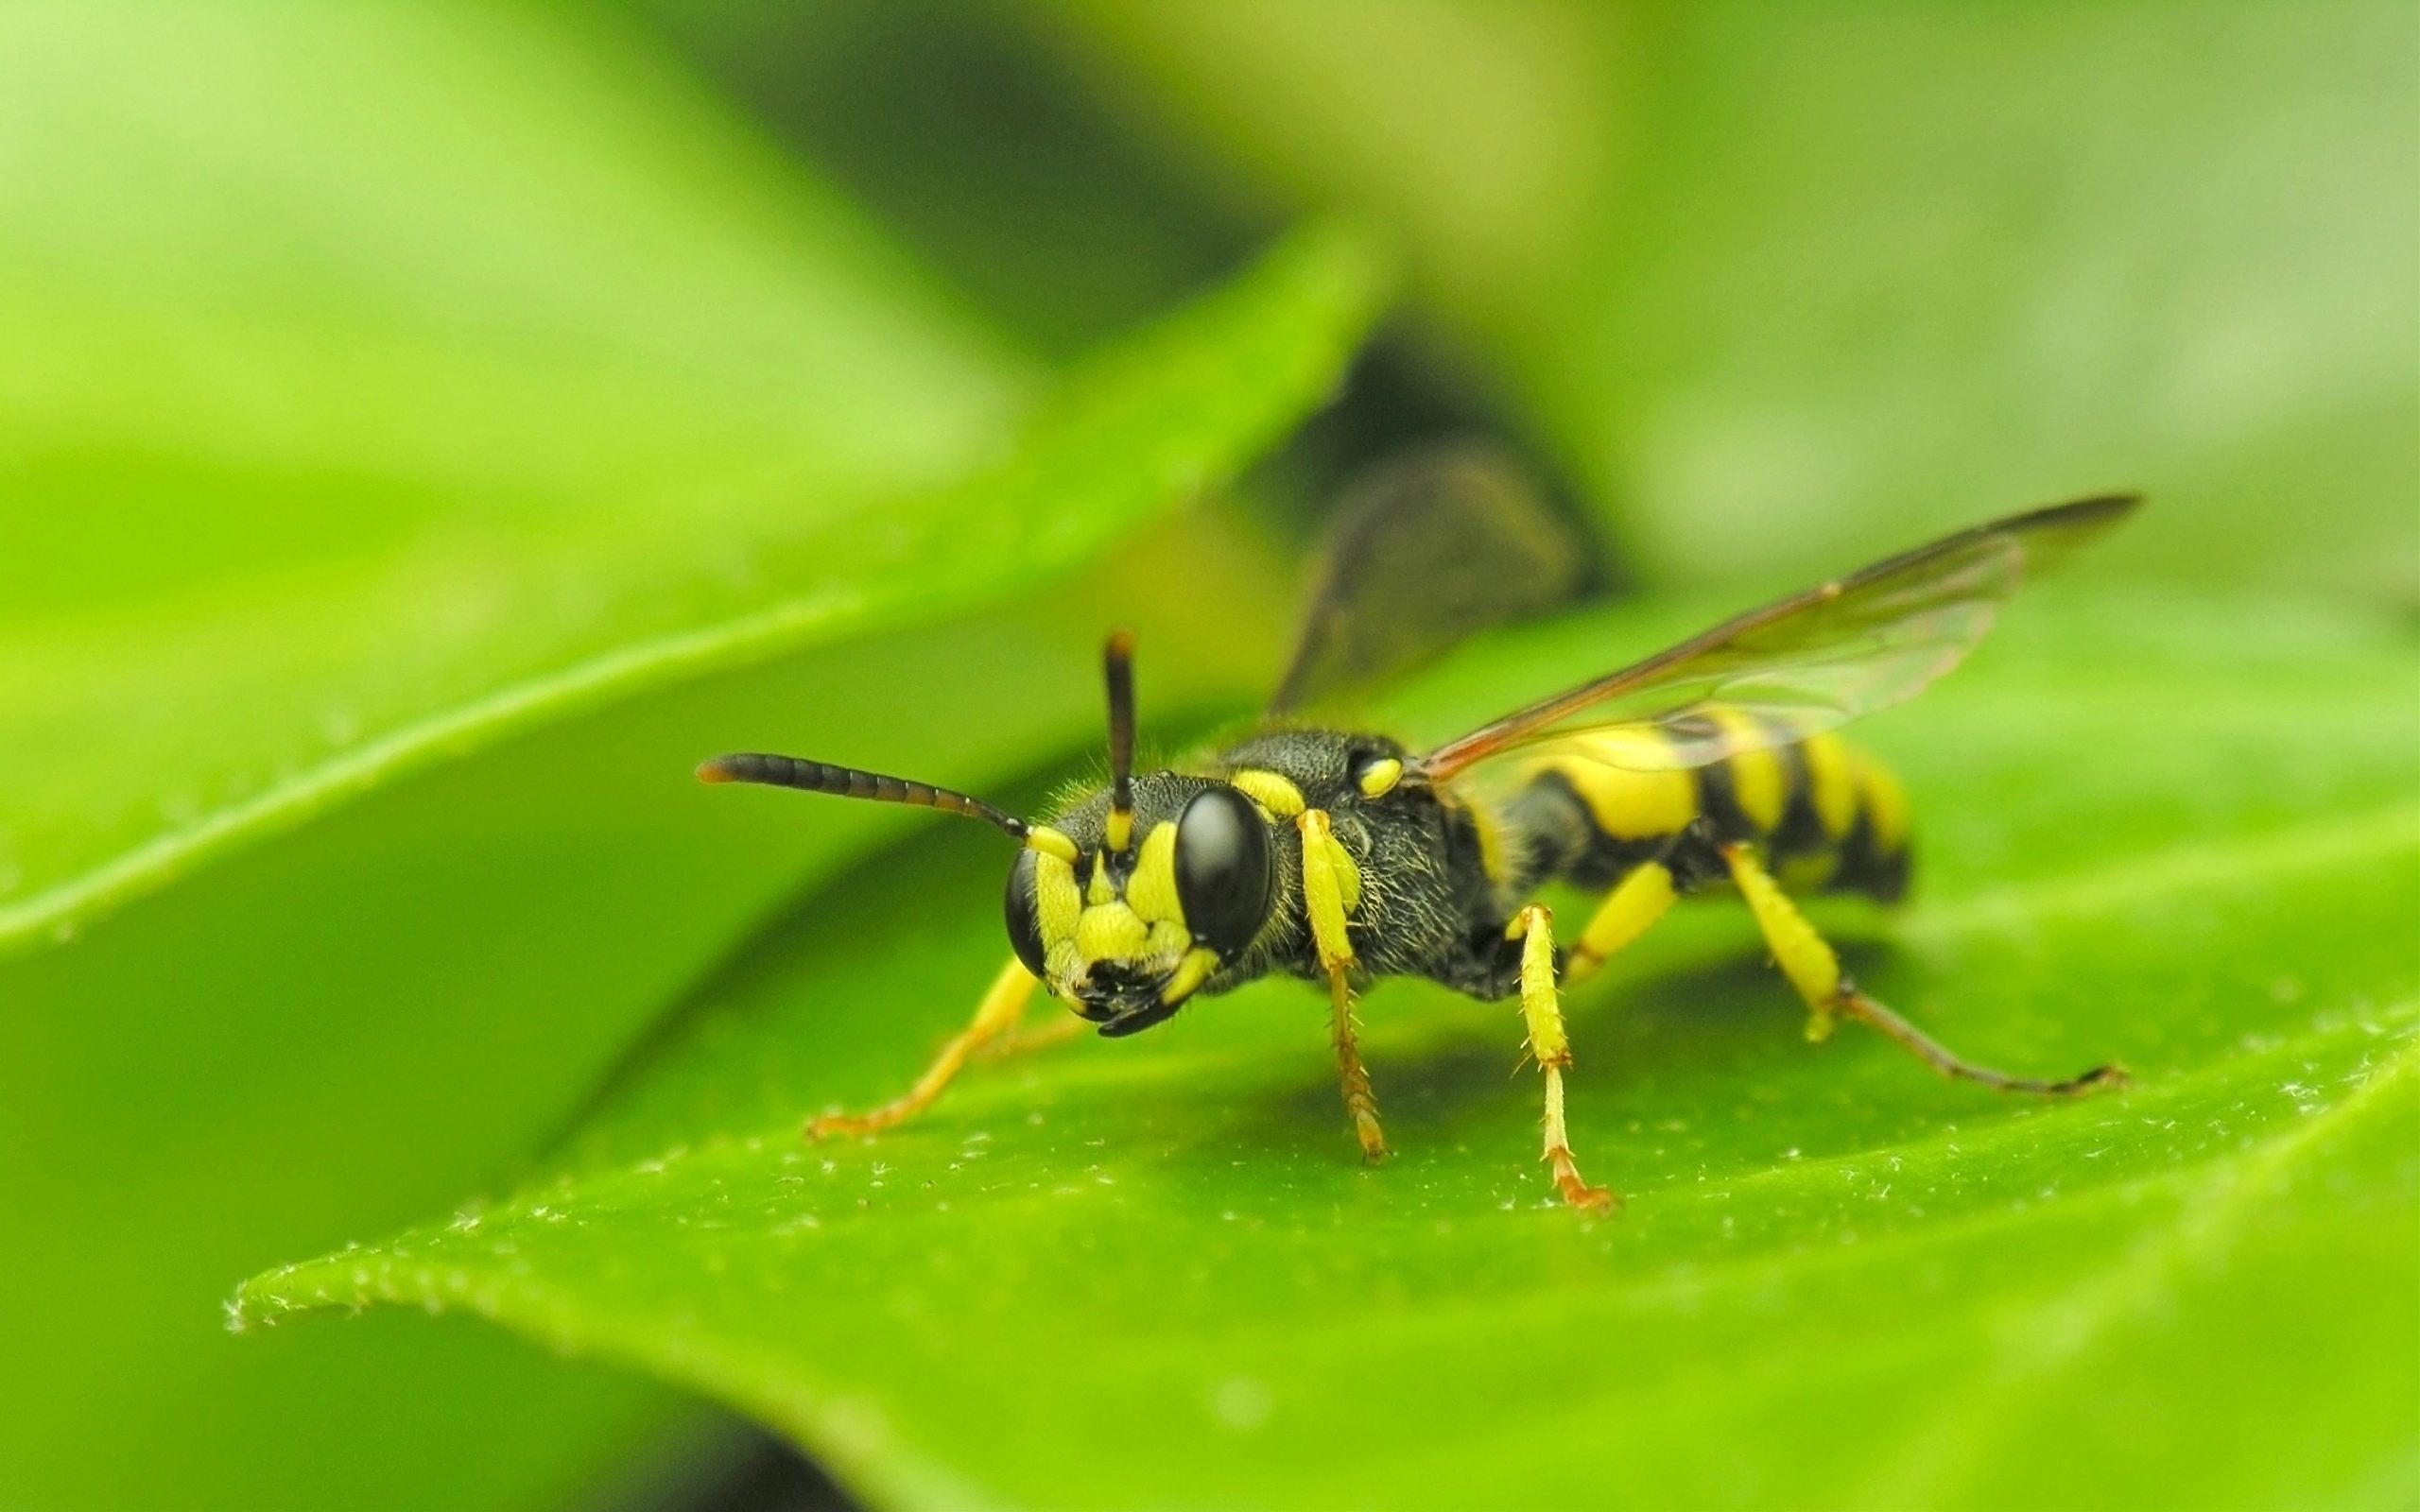 Wasp wallpaper, Wasp insect, Yellow and black, Mobile and tablet, 2560x1600 HD Desktop